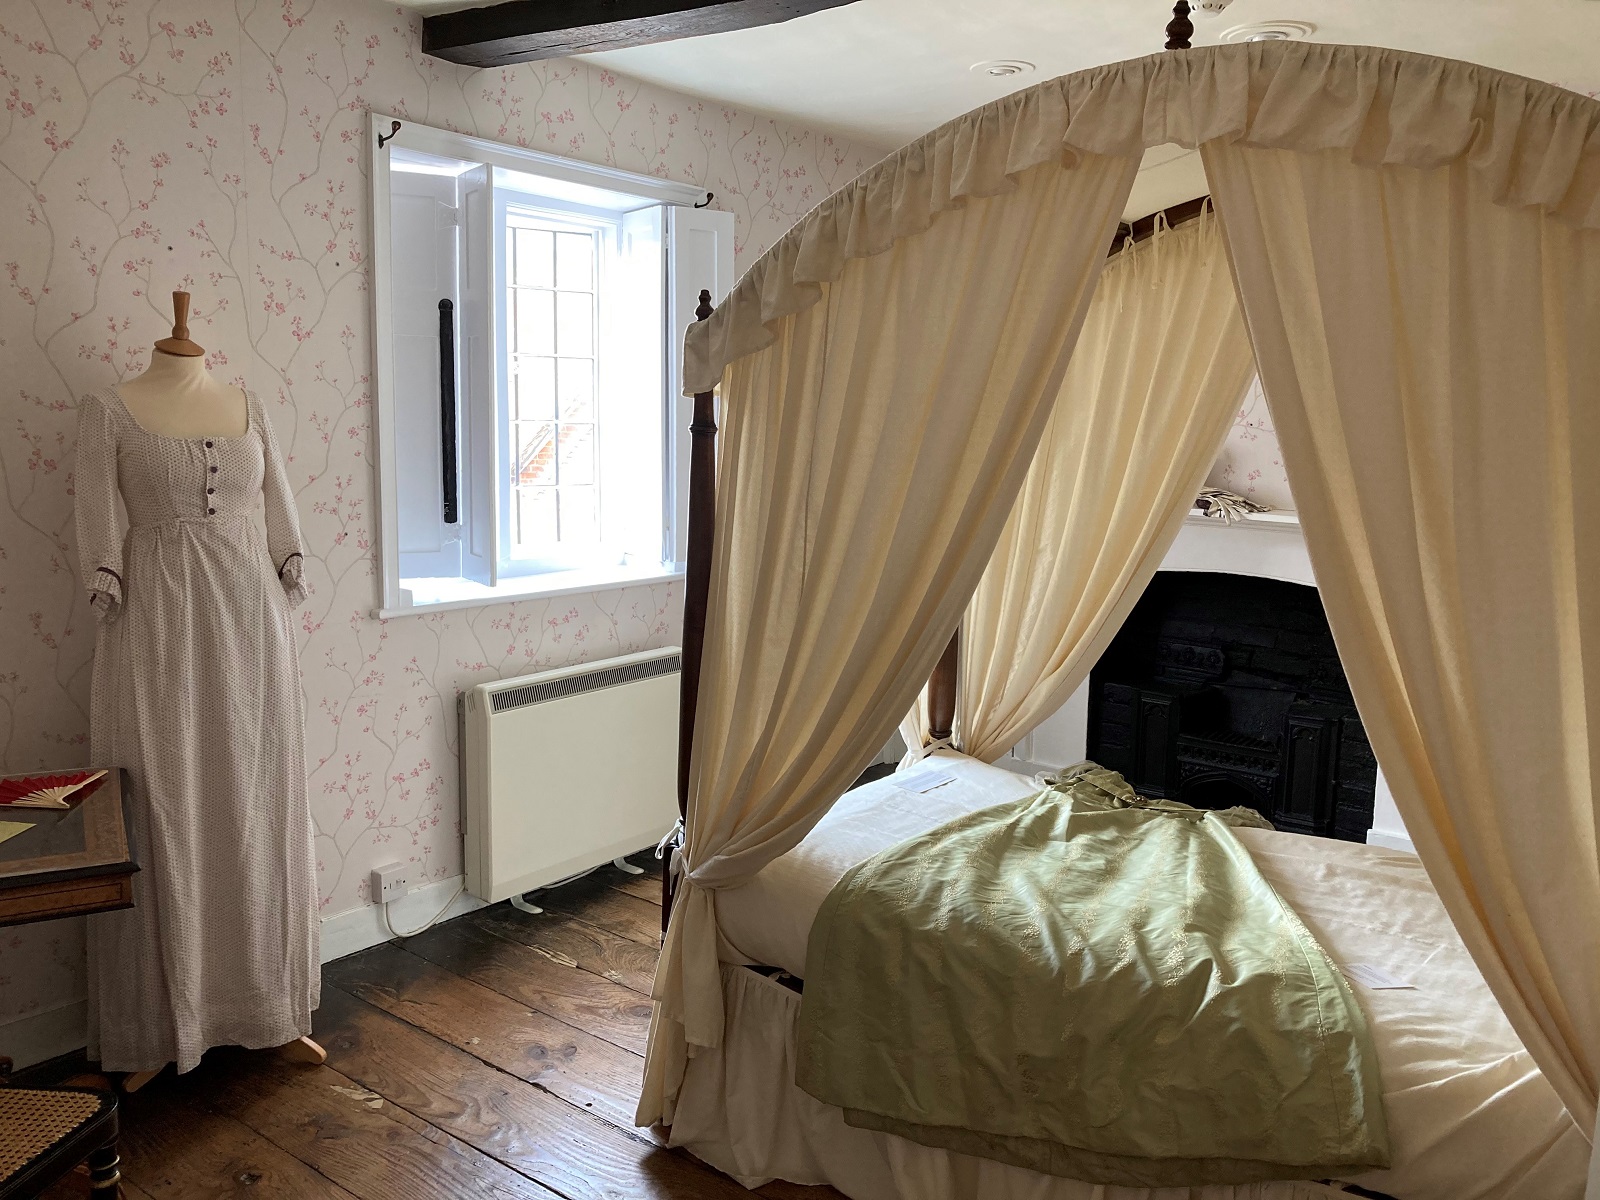 This scene is set in Jane Austen's bedroom at Chawton. The bed is similar in design to Jane’s childhood bed, made to order in 1794 when the Austen family were living in Steventon. Mr Austen placed the order for two beds for Cassandra and Jane, with the Ring Brothers in Basingstoke.